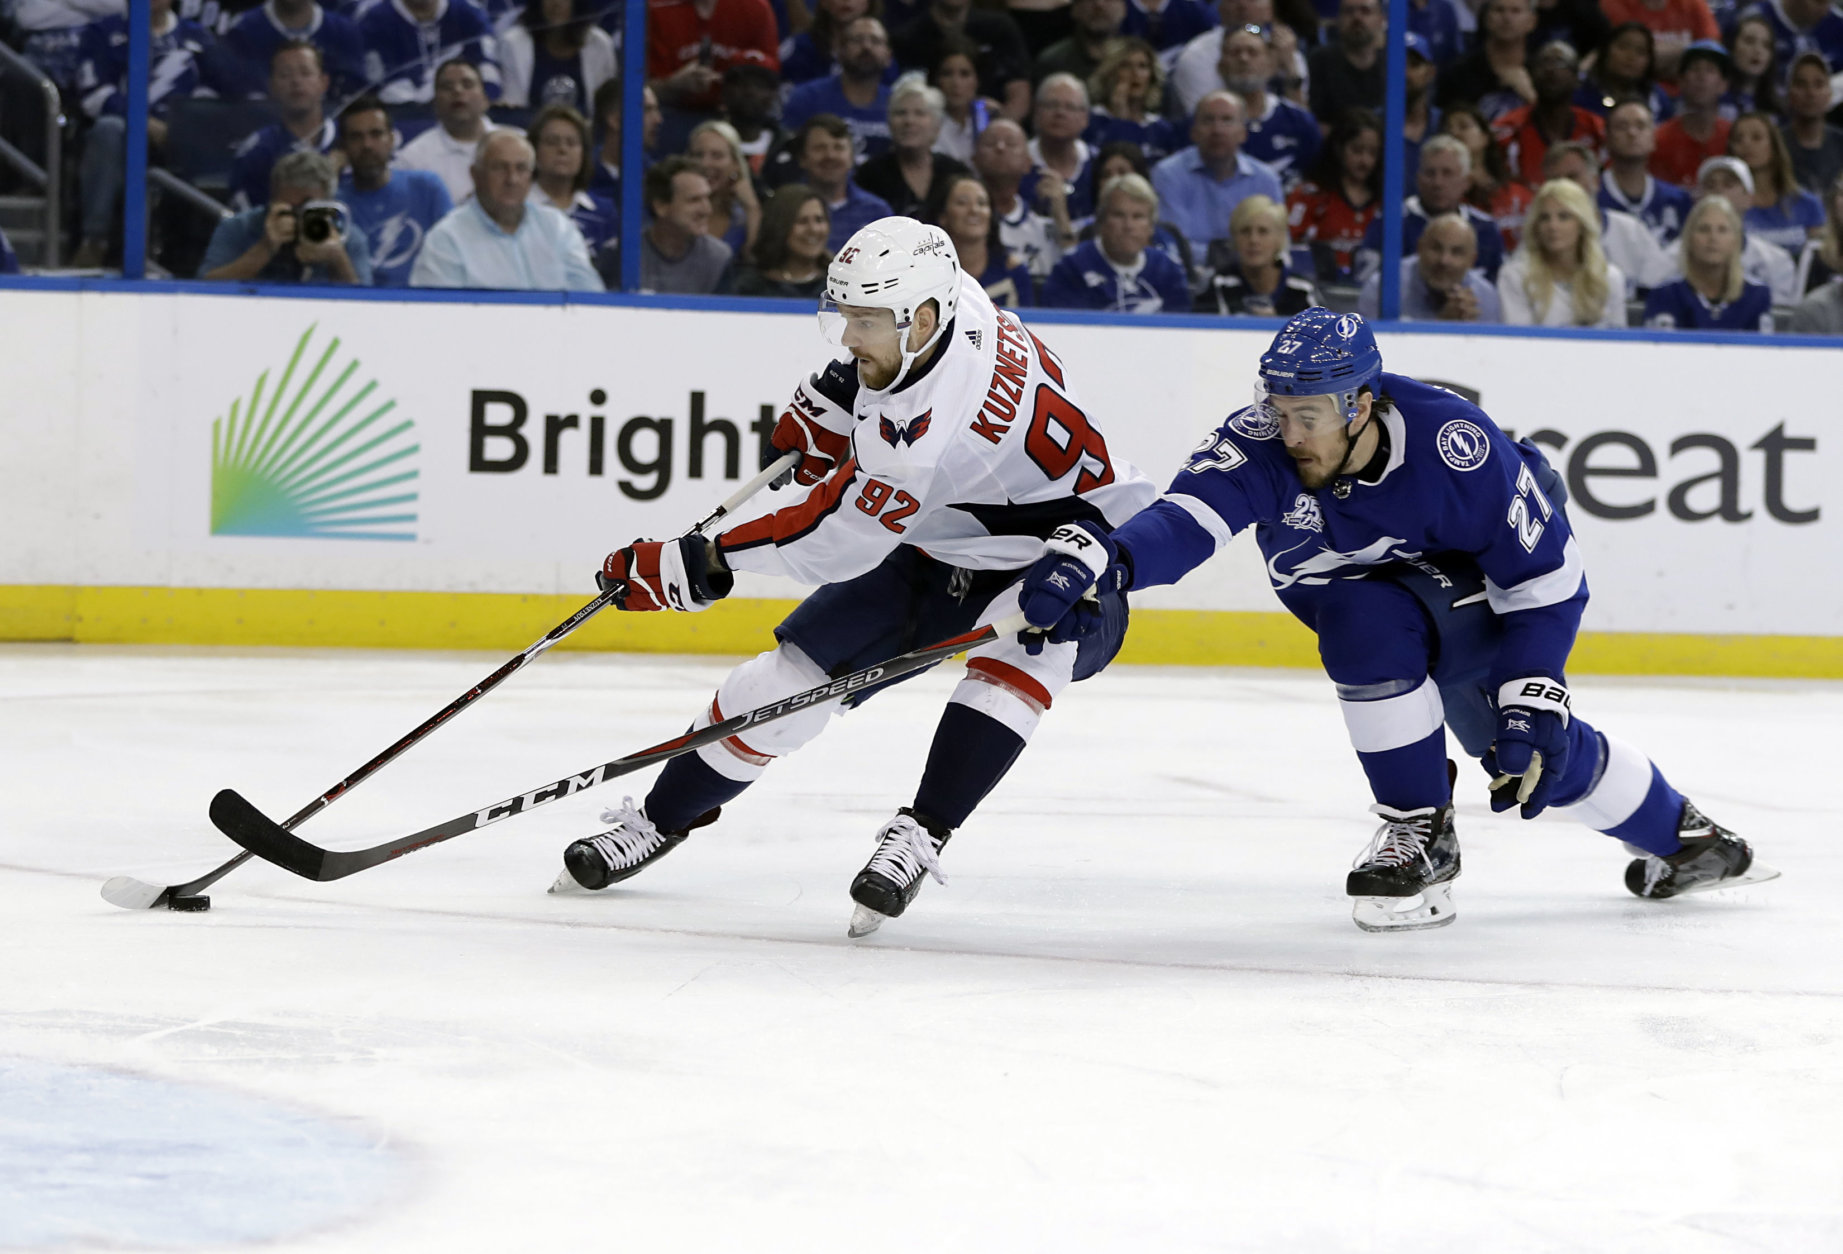 Washington Capitals center Evgeny Kuznetsov (92) moves the puck past Tampa Bay Lightning defenseman Ryan McDonagh (27) during the first period of Game 7 of the NHL Eastern Conference finals hockey playoff series Wednesday, May 23, 2018, in Tampa, Fla. (AP Photo/Chris O'Meara)